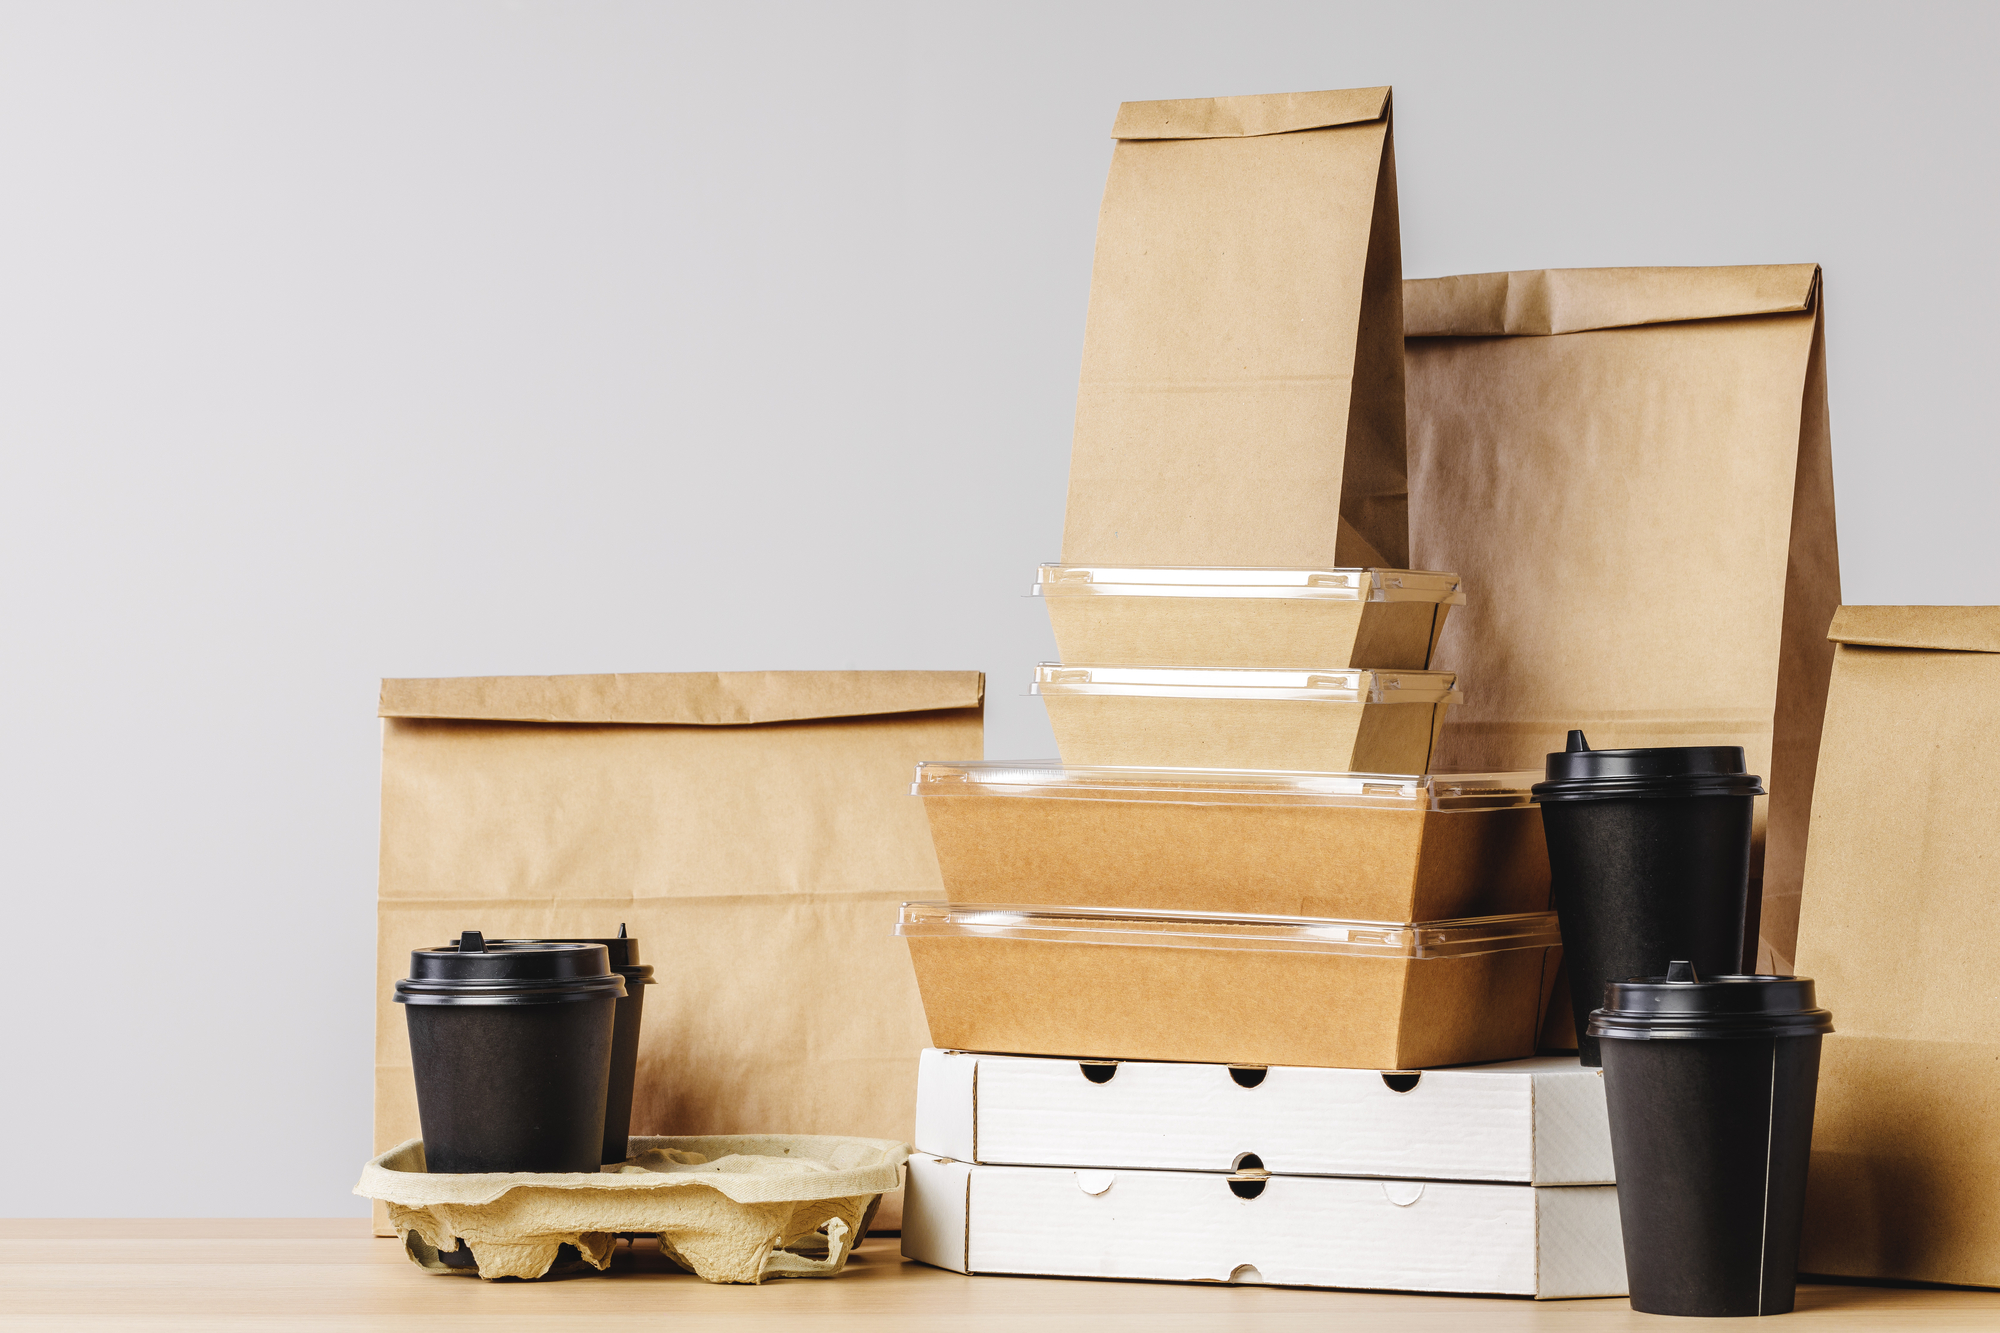 A collection of brown and white takeout containers and bags stacked against a grey background.